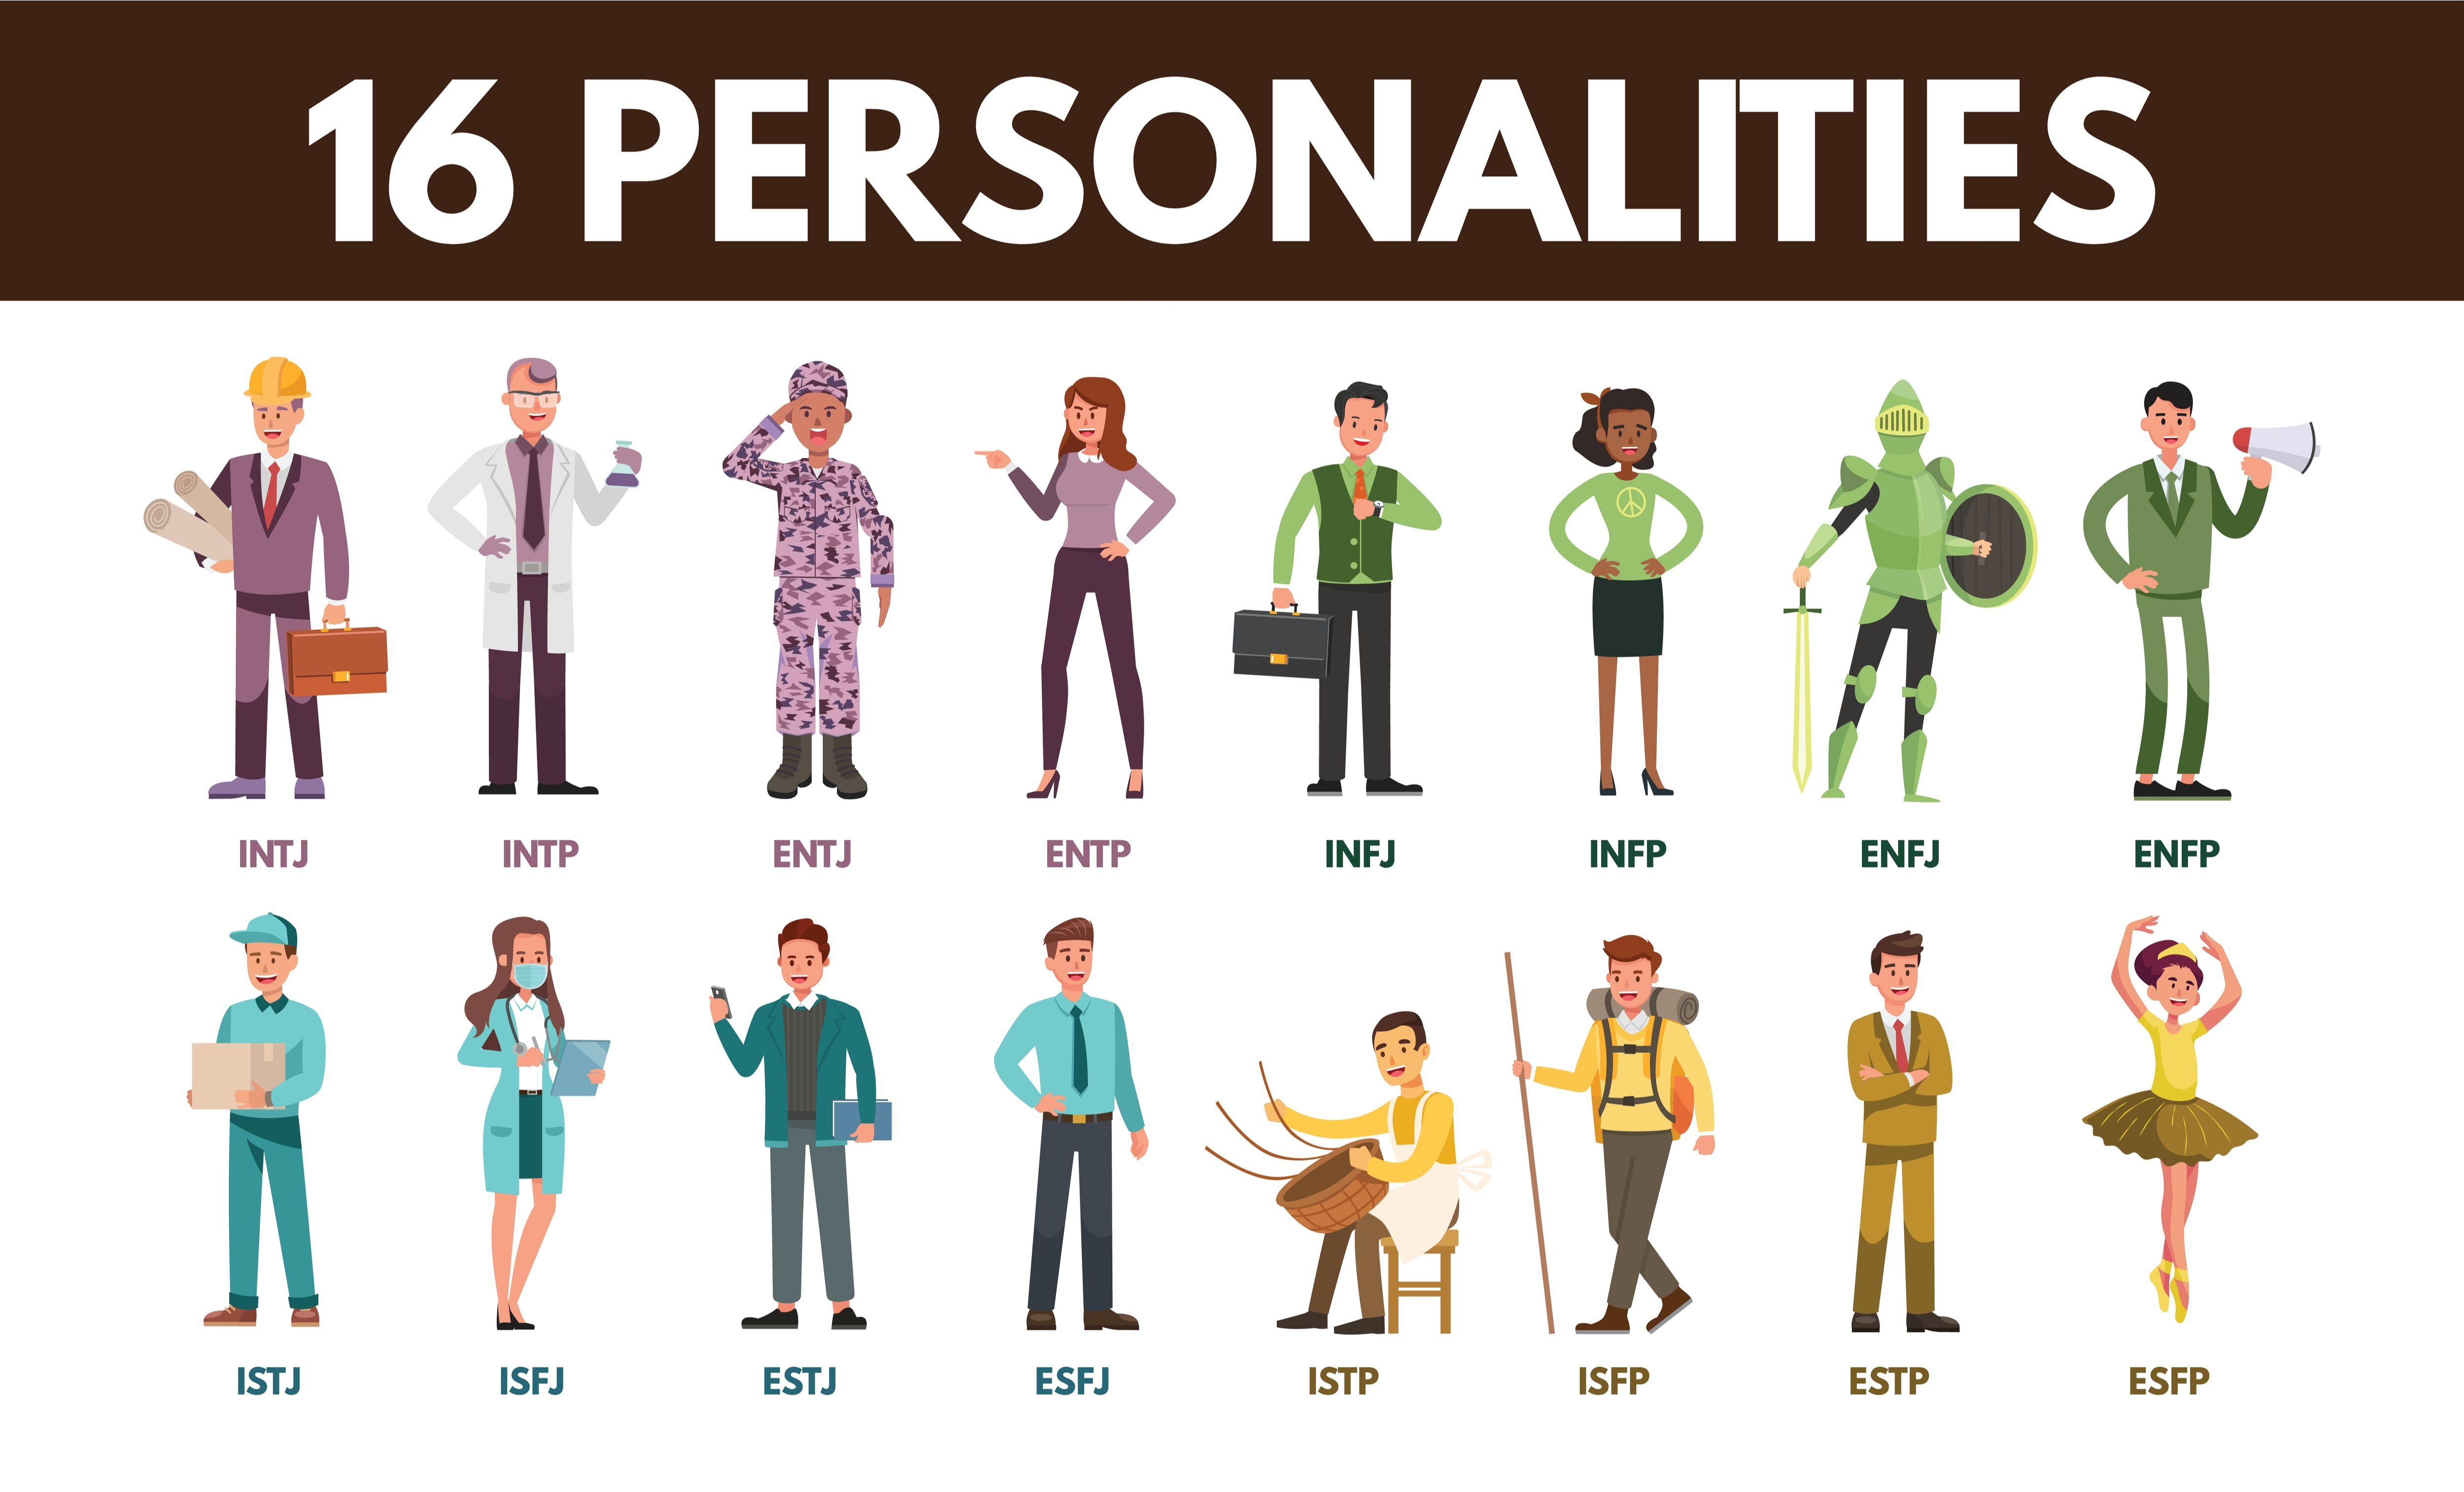 The Problem With the Myers-Briggs Personality Test